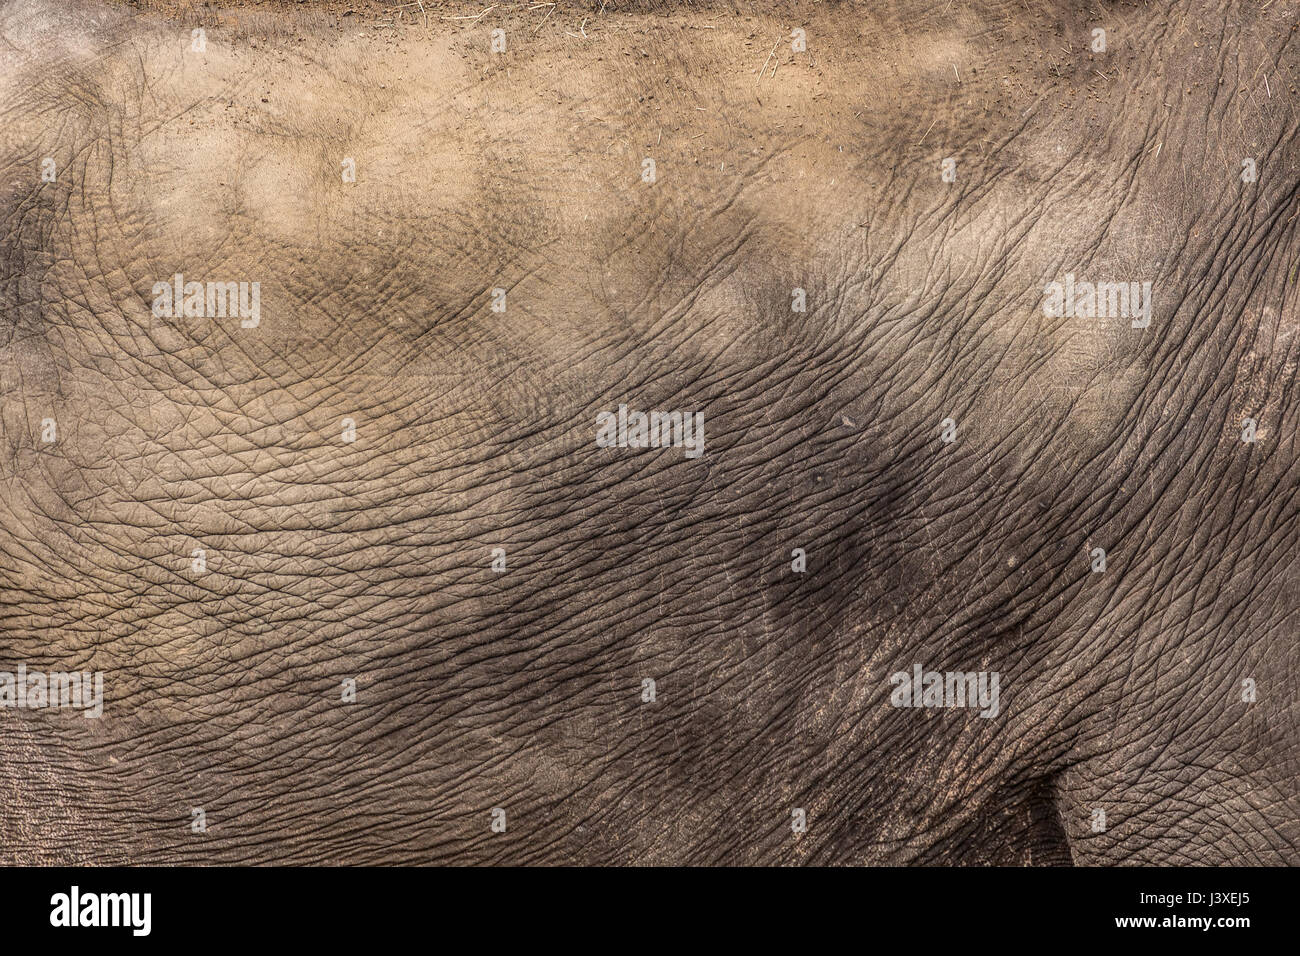 Elephant skin, abstract natural animal background Stock Photo